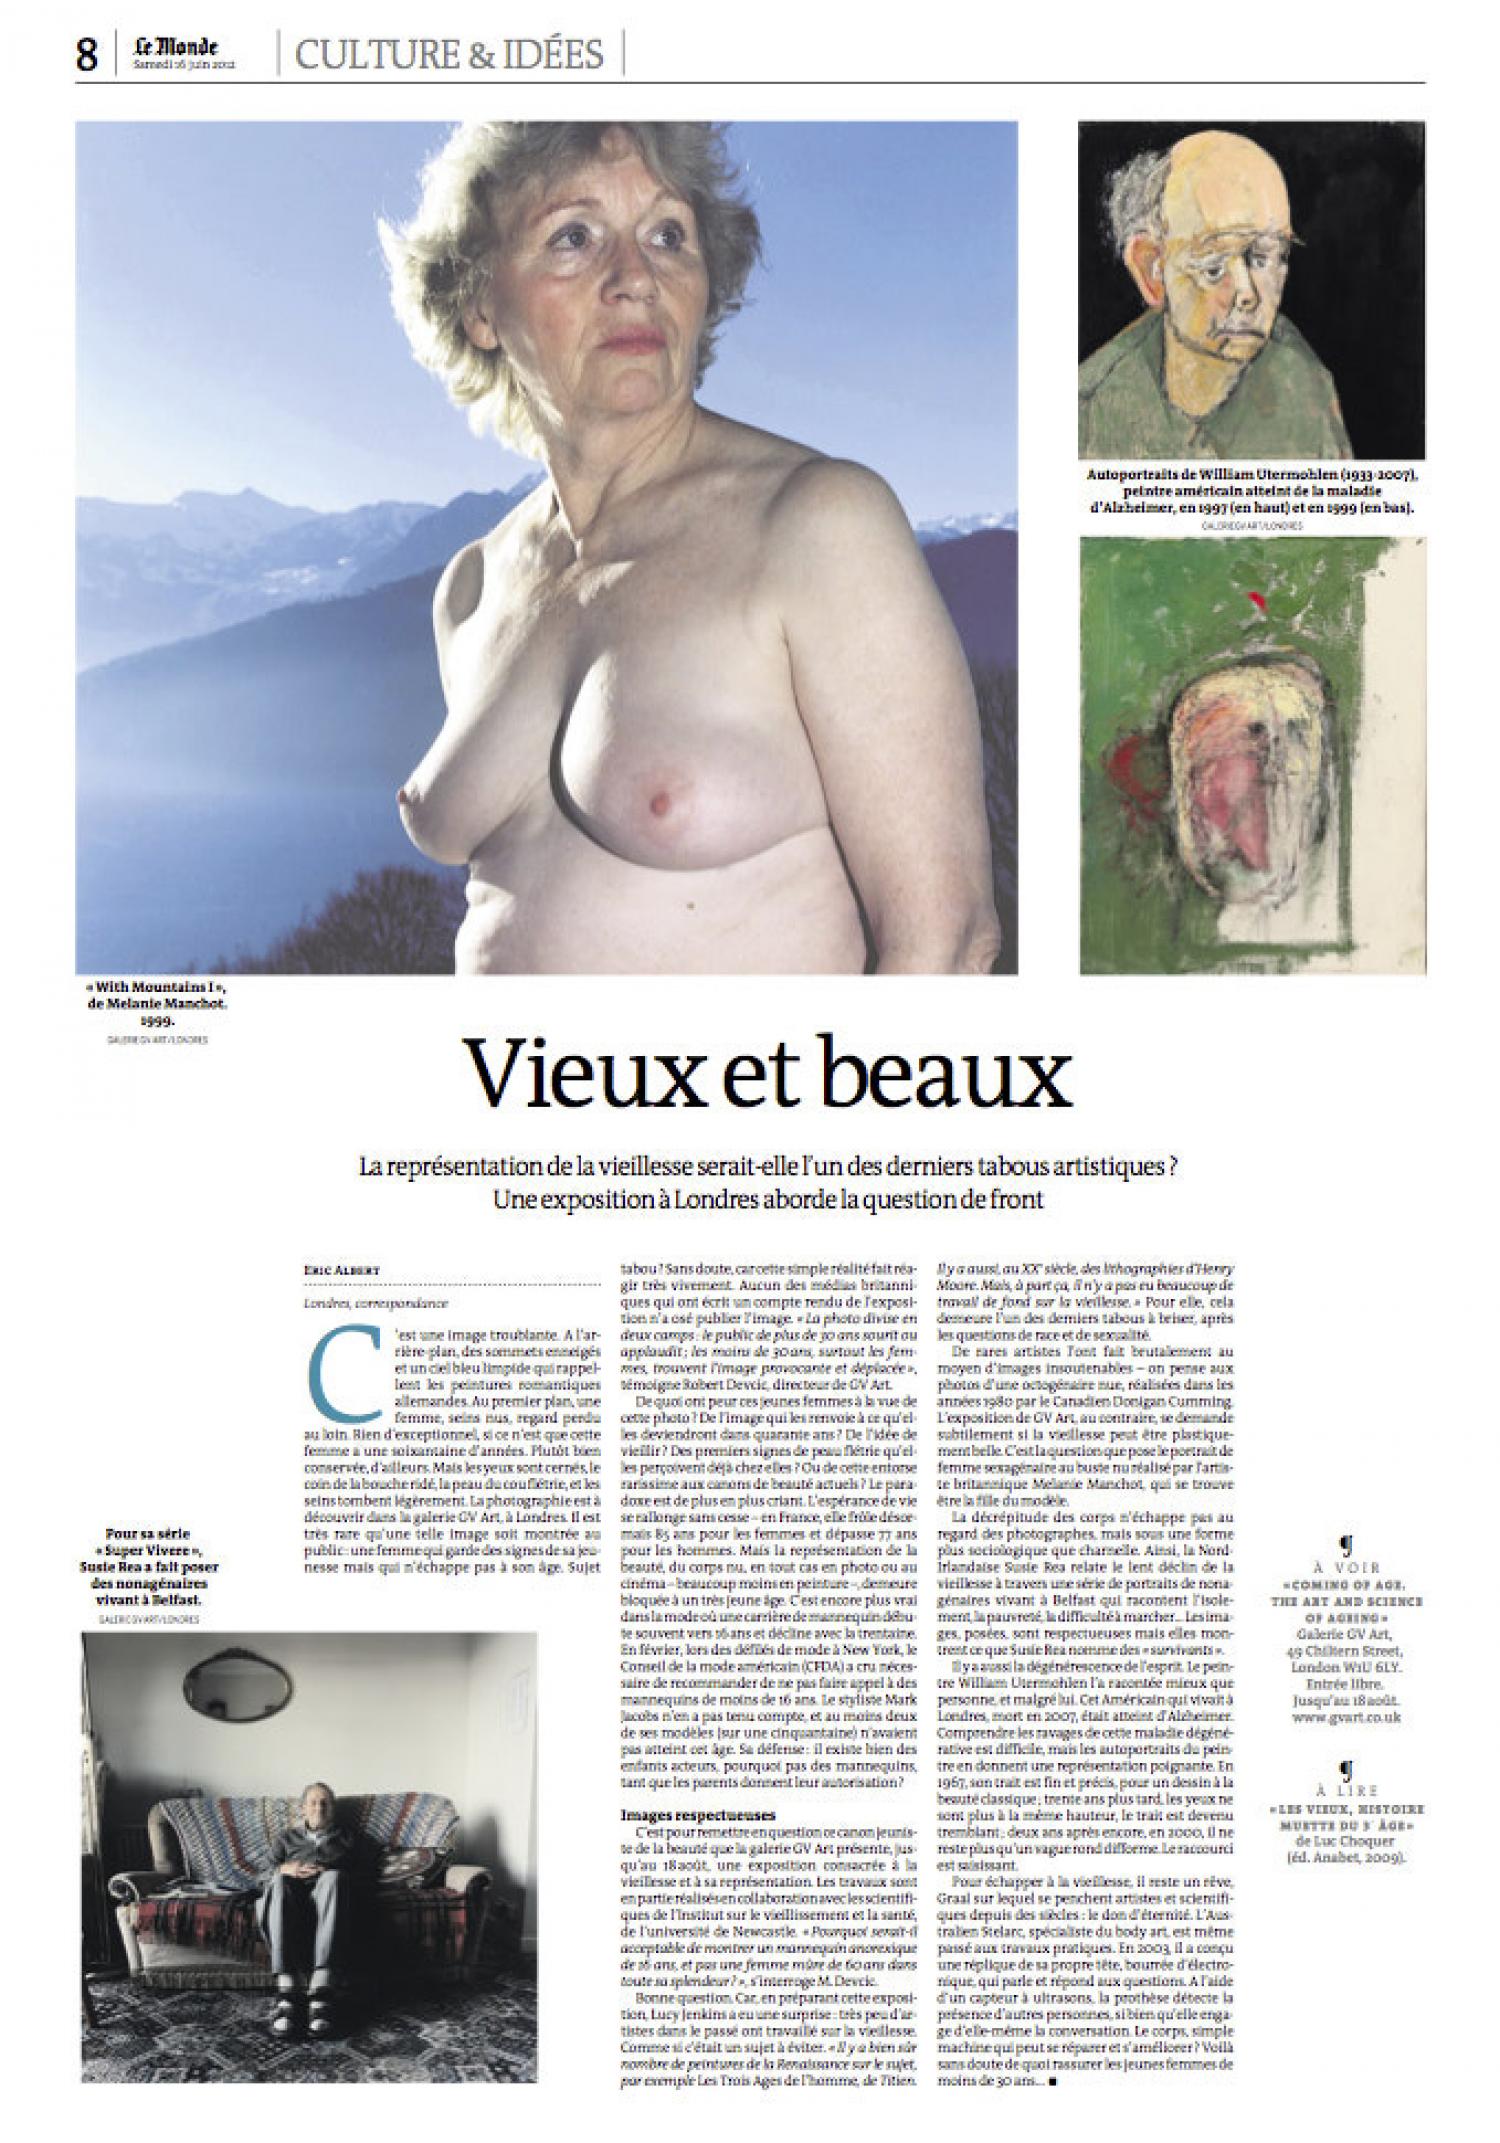 Le Monde Article Coming of Age